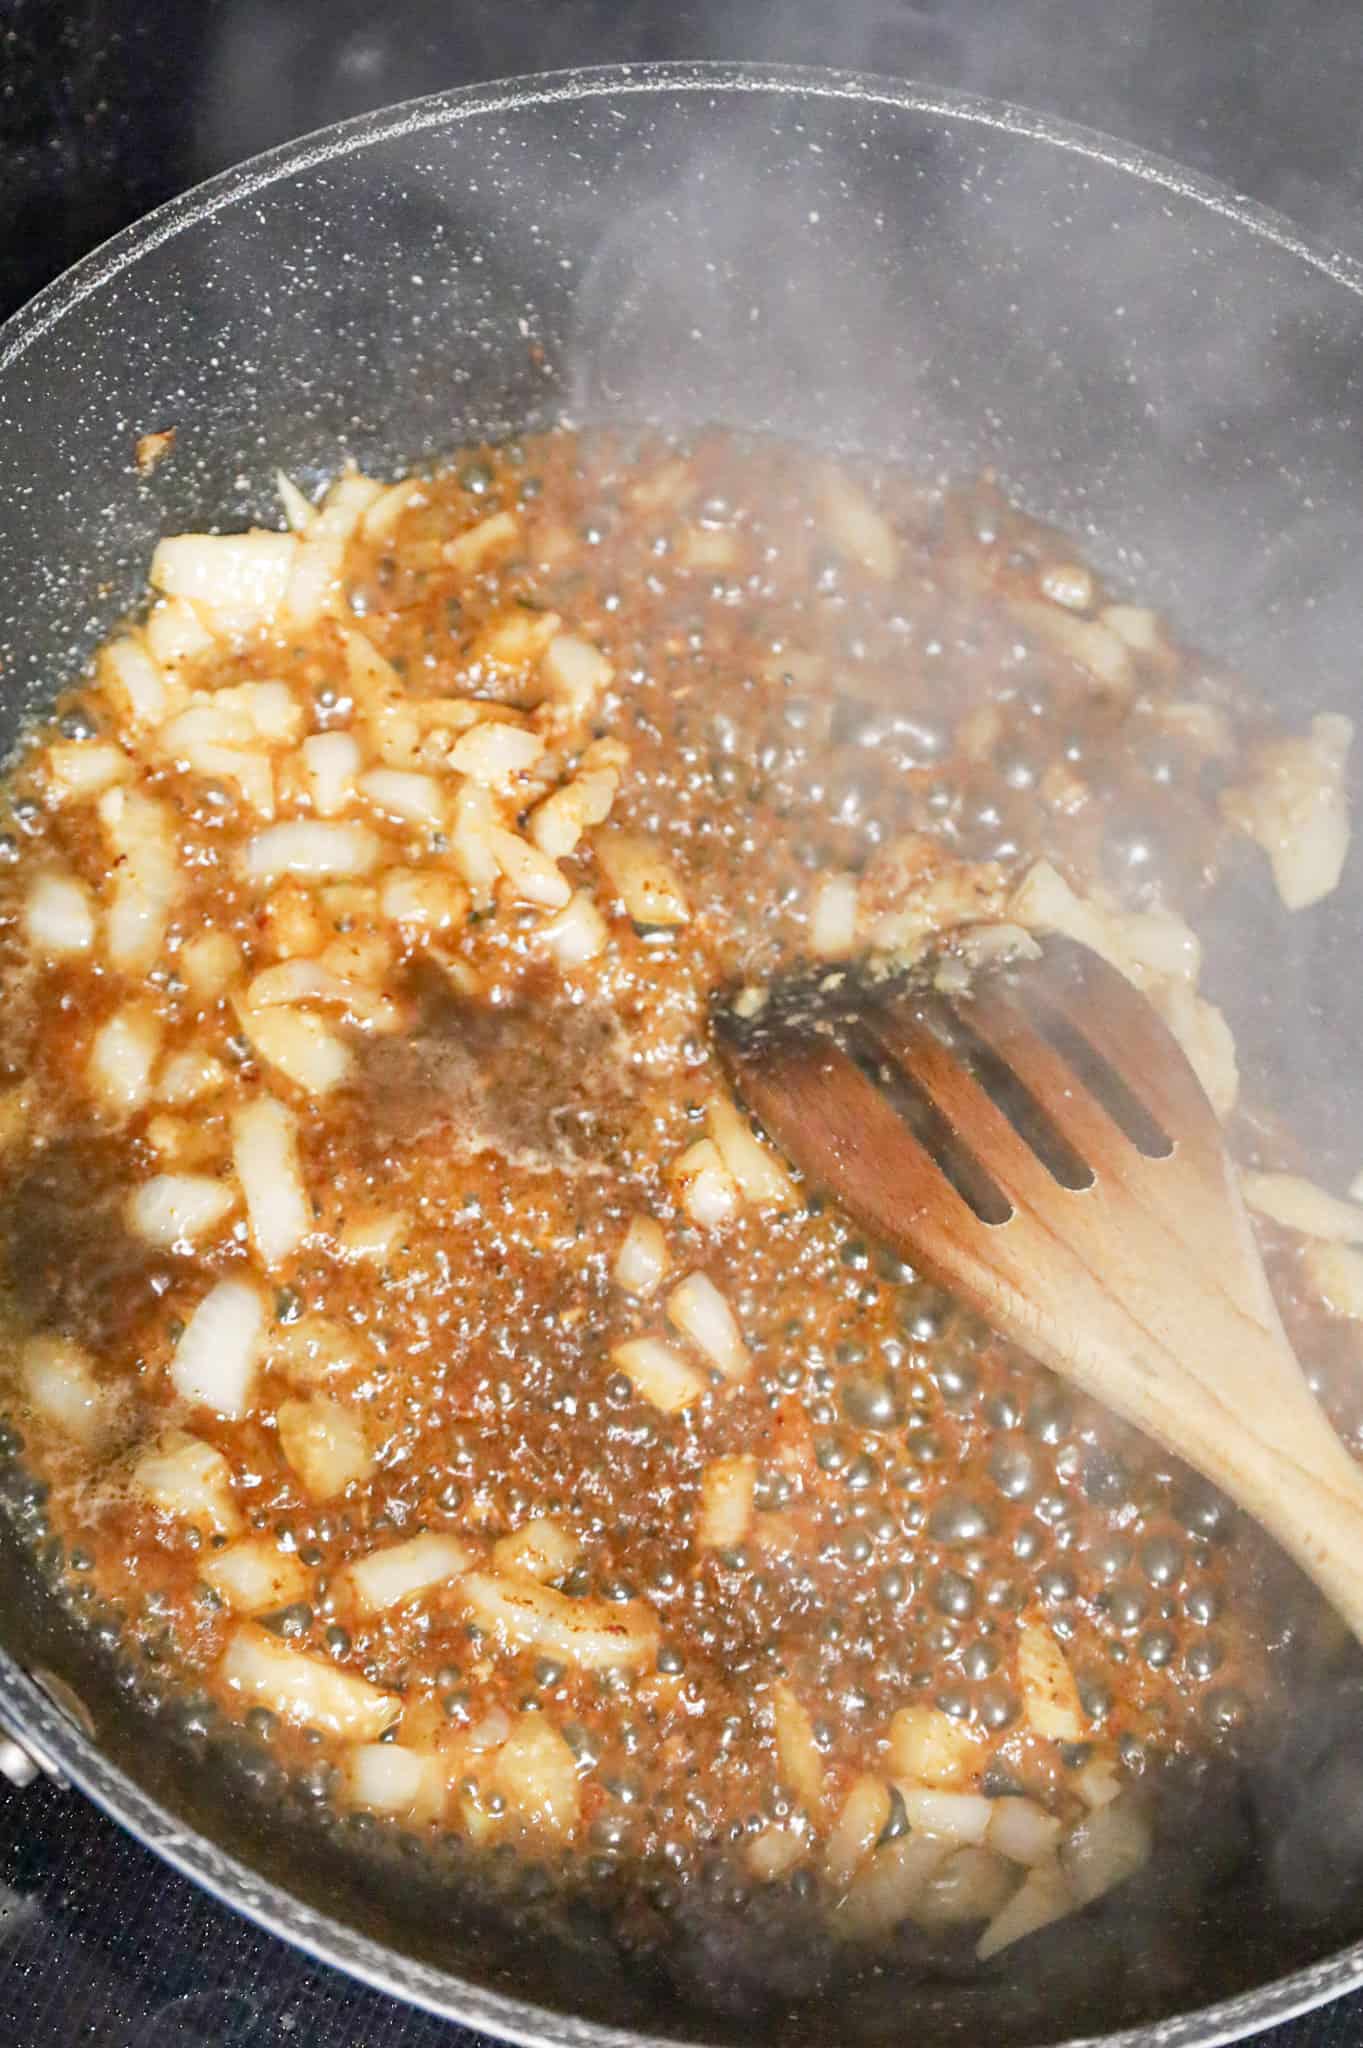 marsala wine added to skillet with diced onions